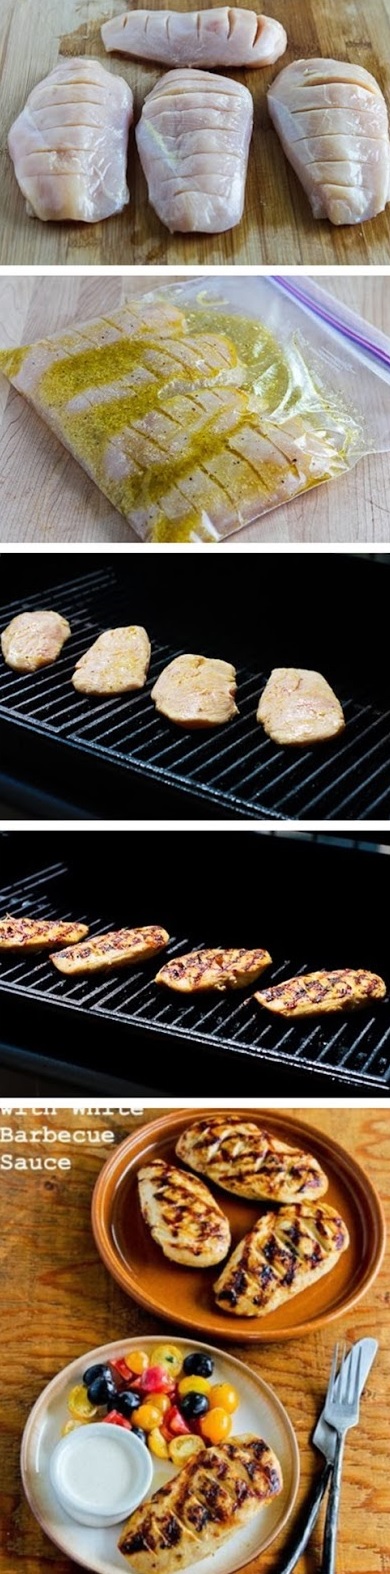 Grilled Chicken with White Barbecue Sauce